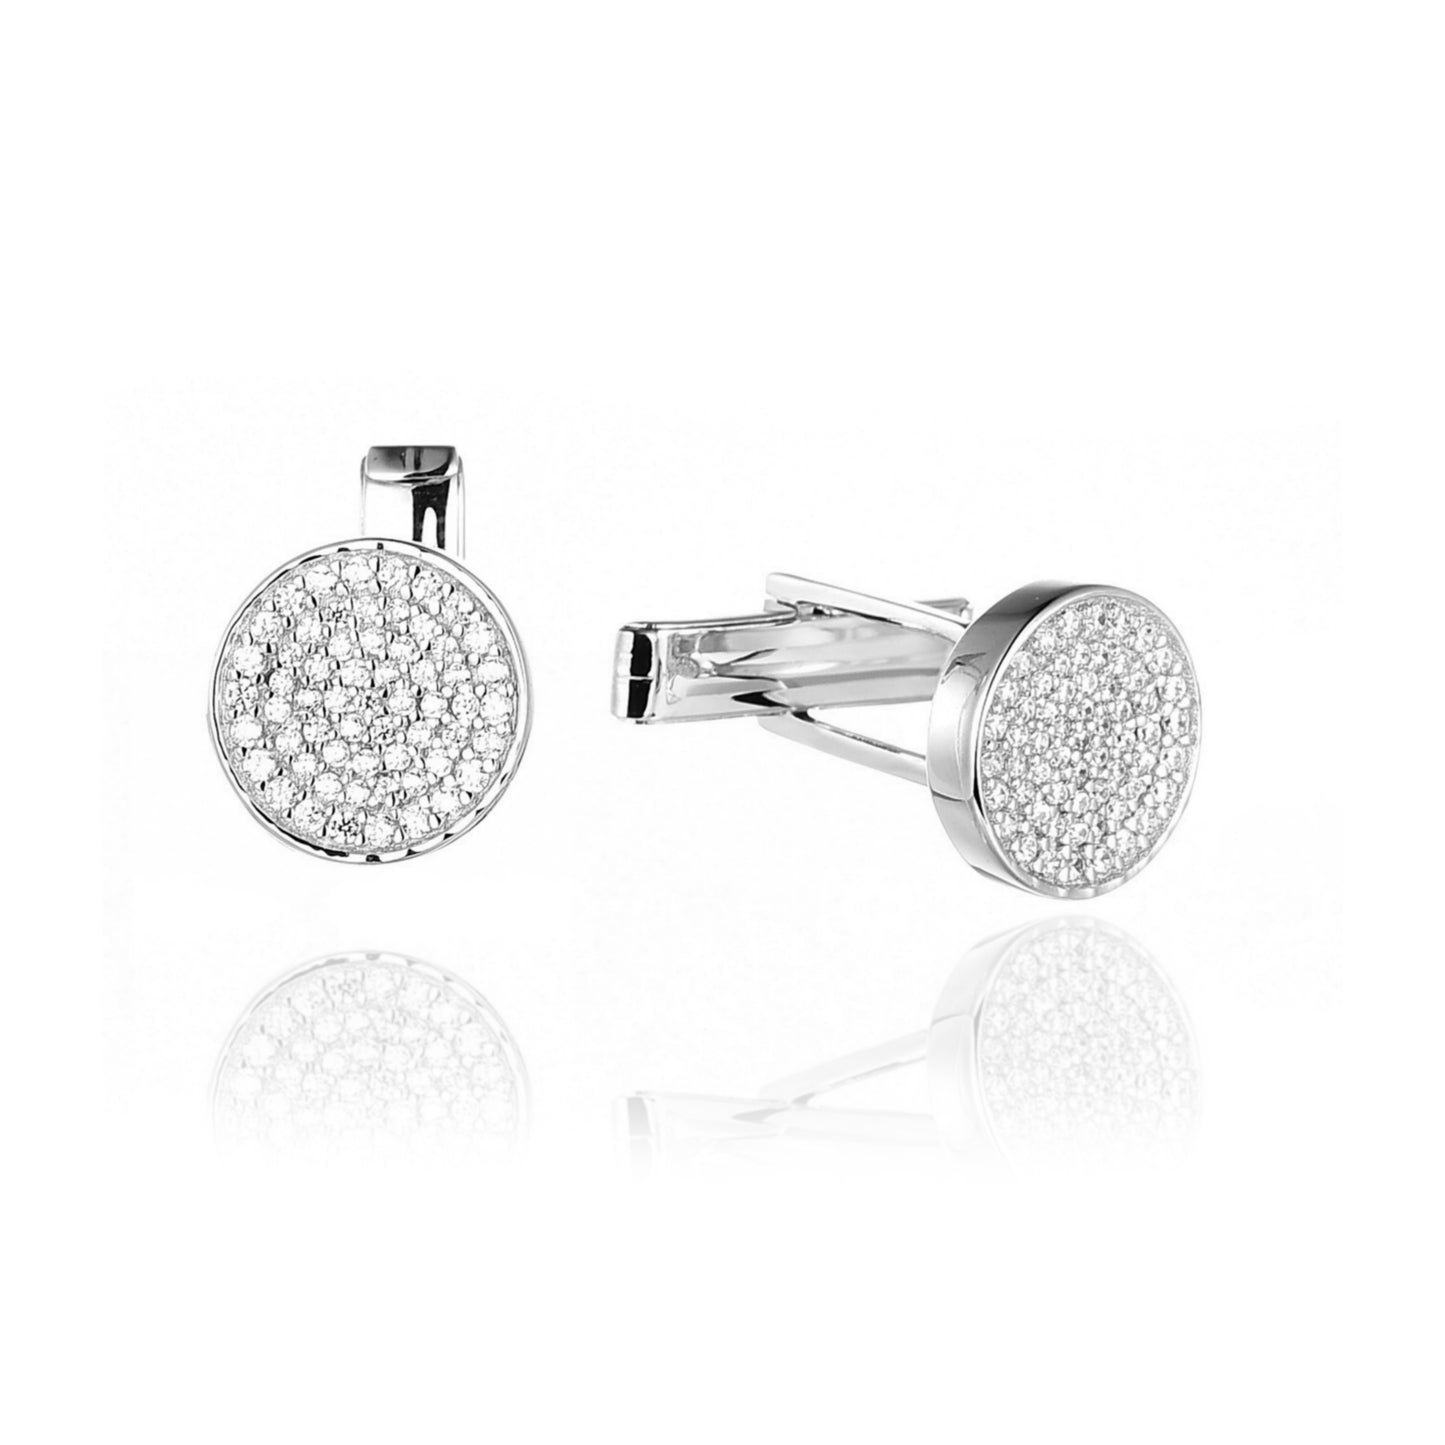 Sterling Silver Micropave Round Cufflinks - HK Jewels